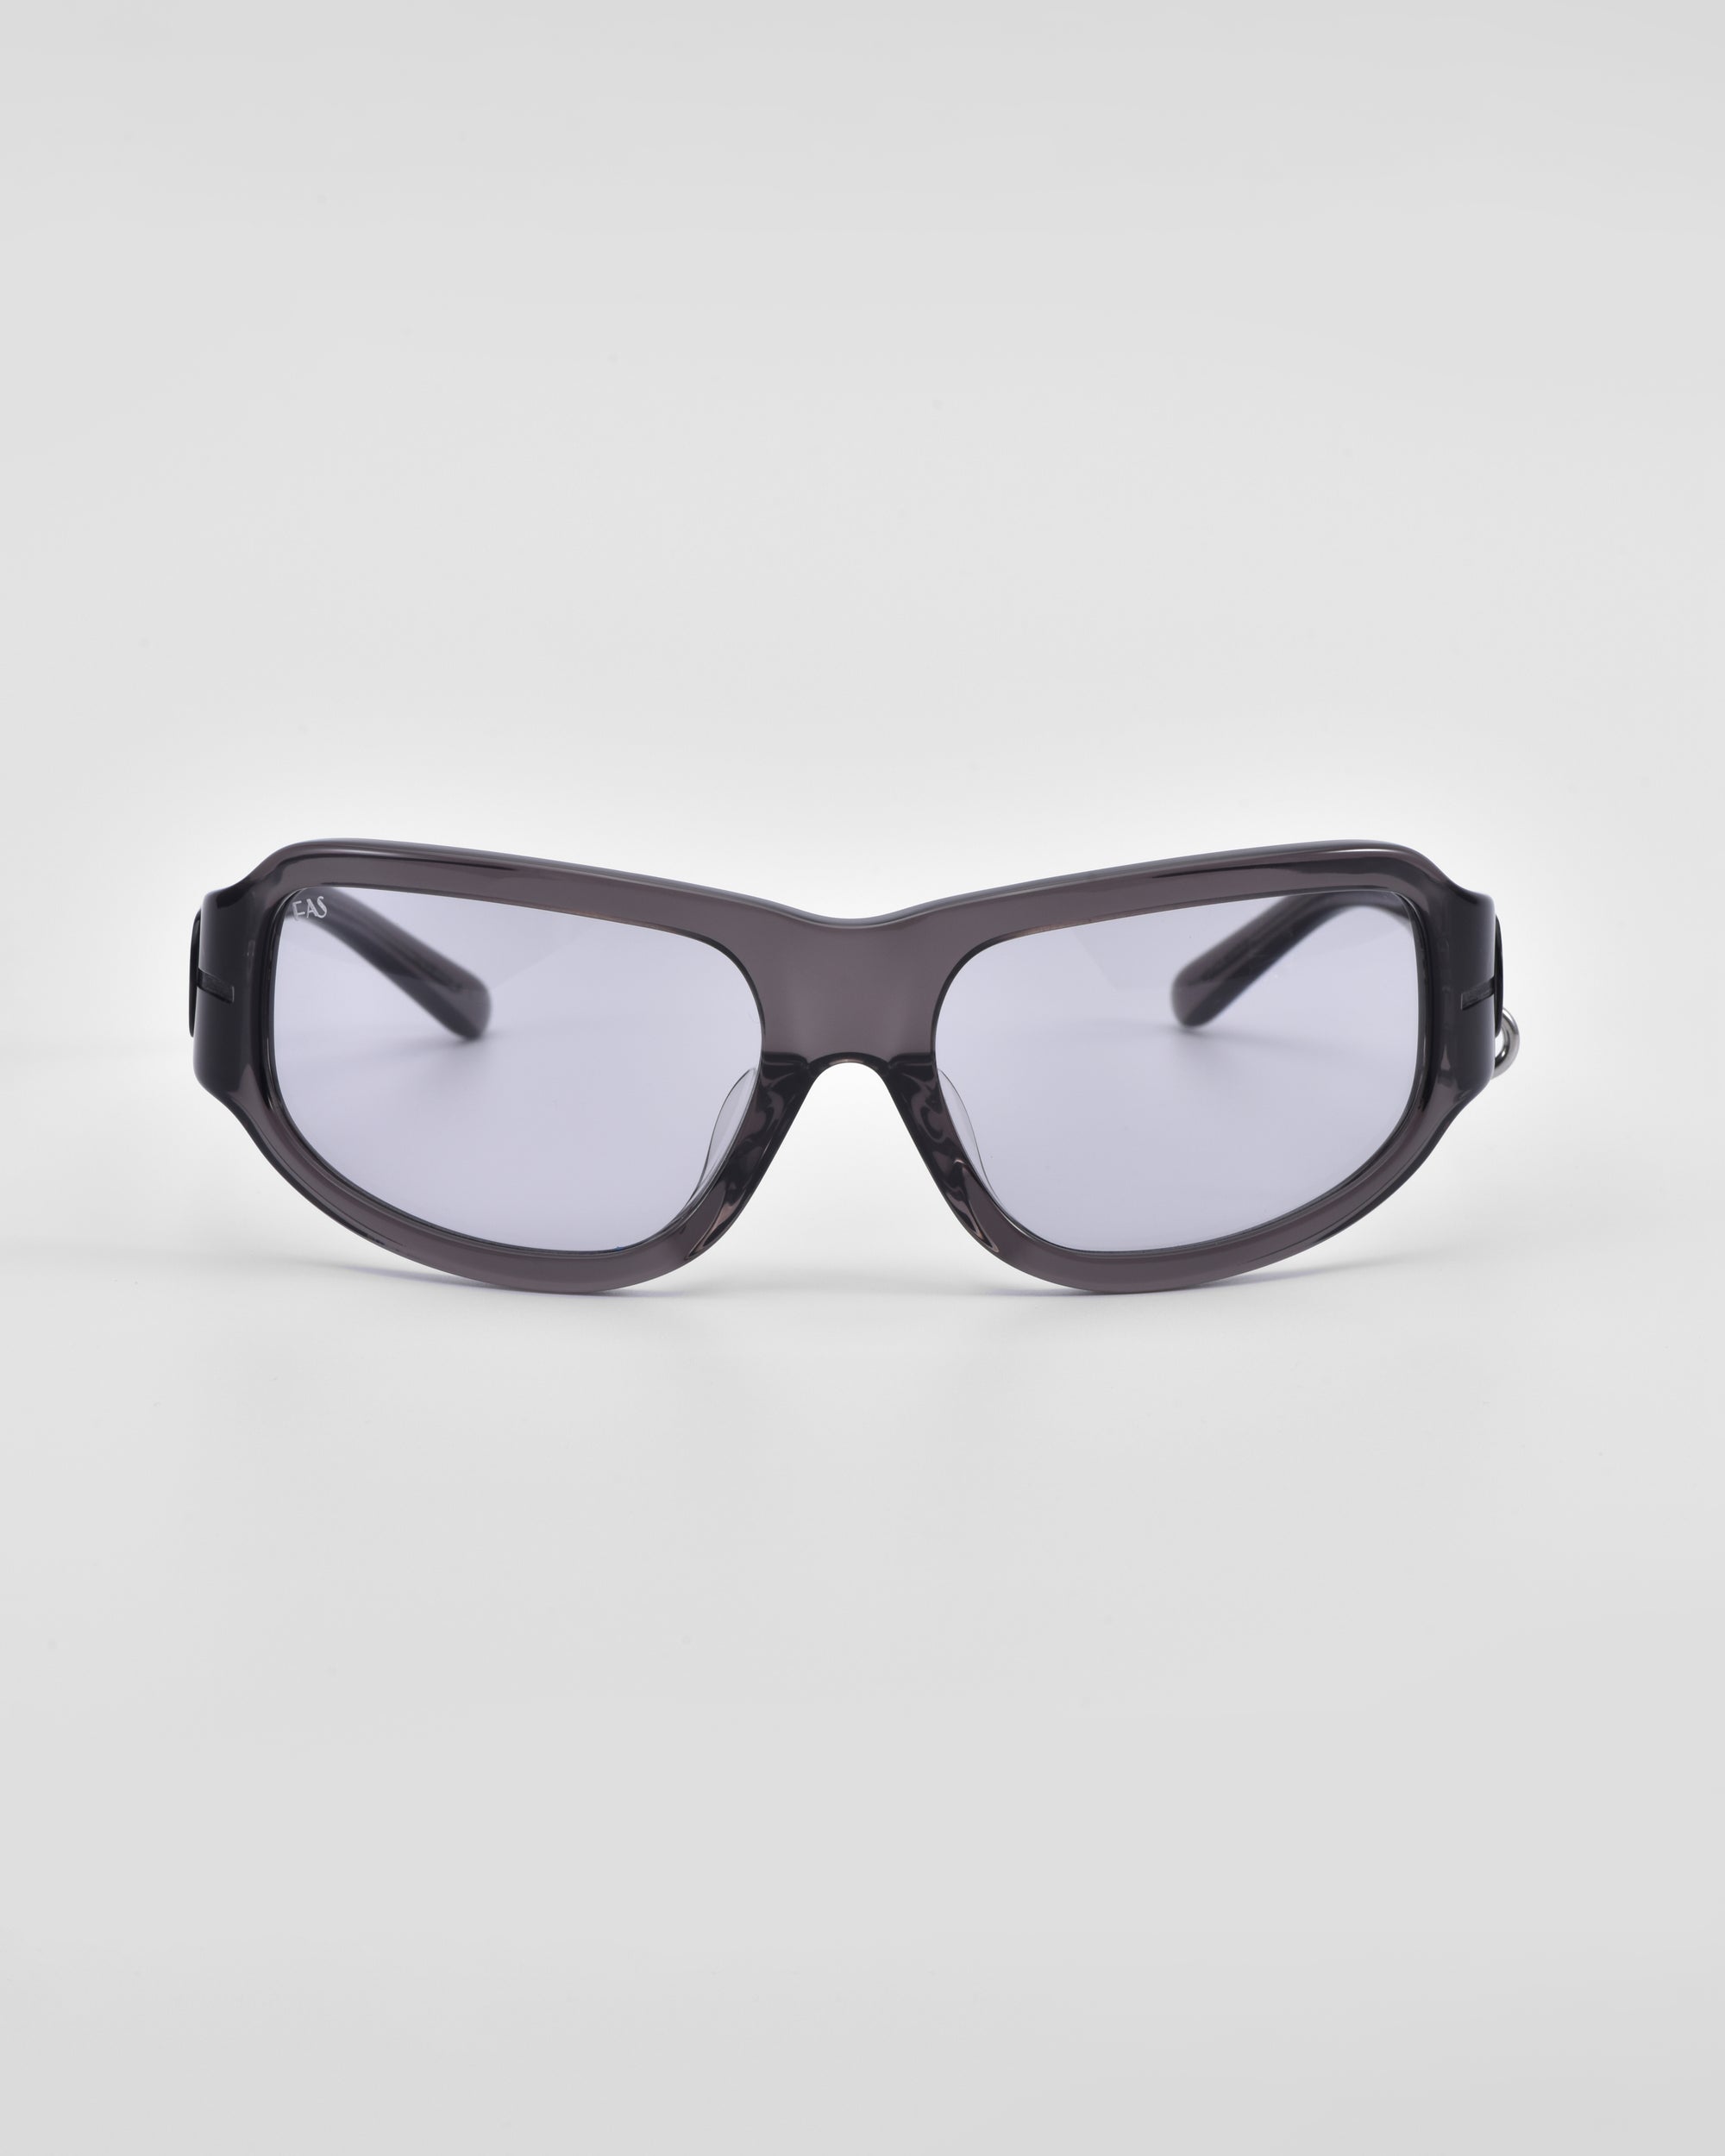 A pair of Raven sunglasses from For Art's Sake® in black, featuring slightly tinted lenses, is displayed against a plain white background. The Y2K wrap sunglasses boast a design with a curved frame and thick temples.